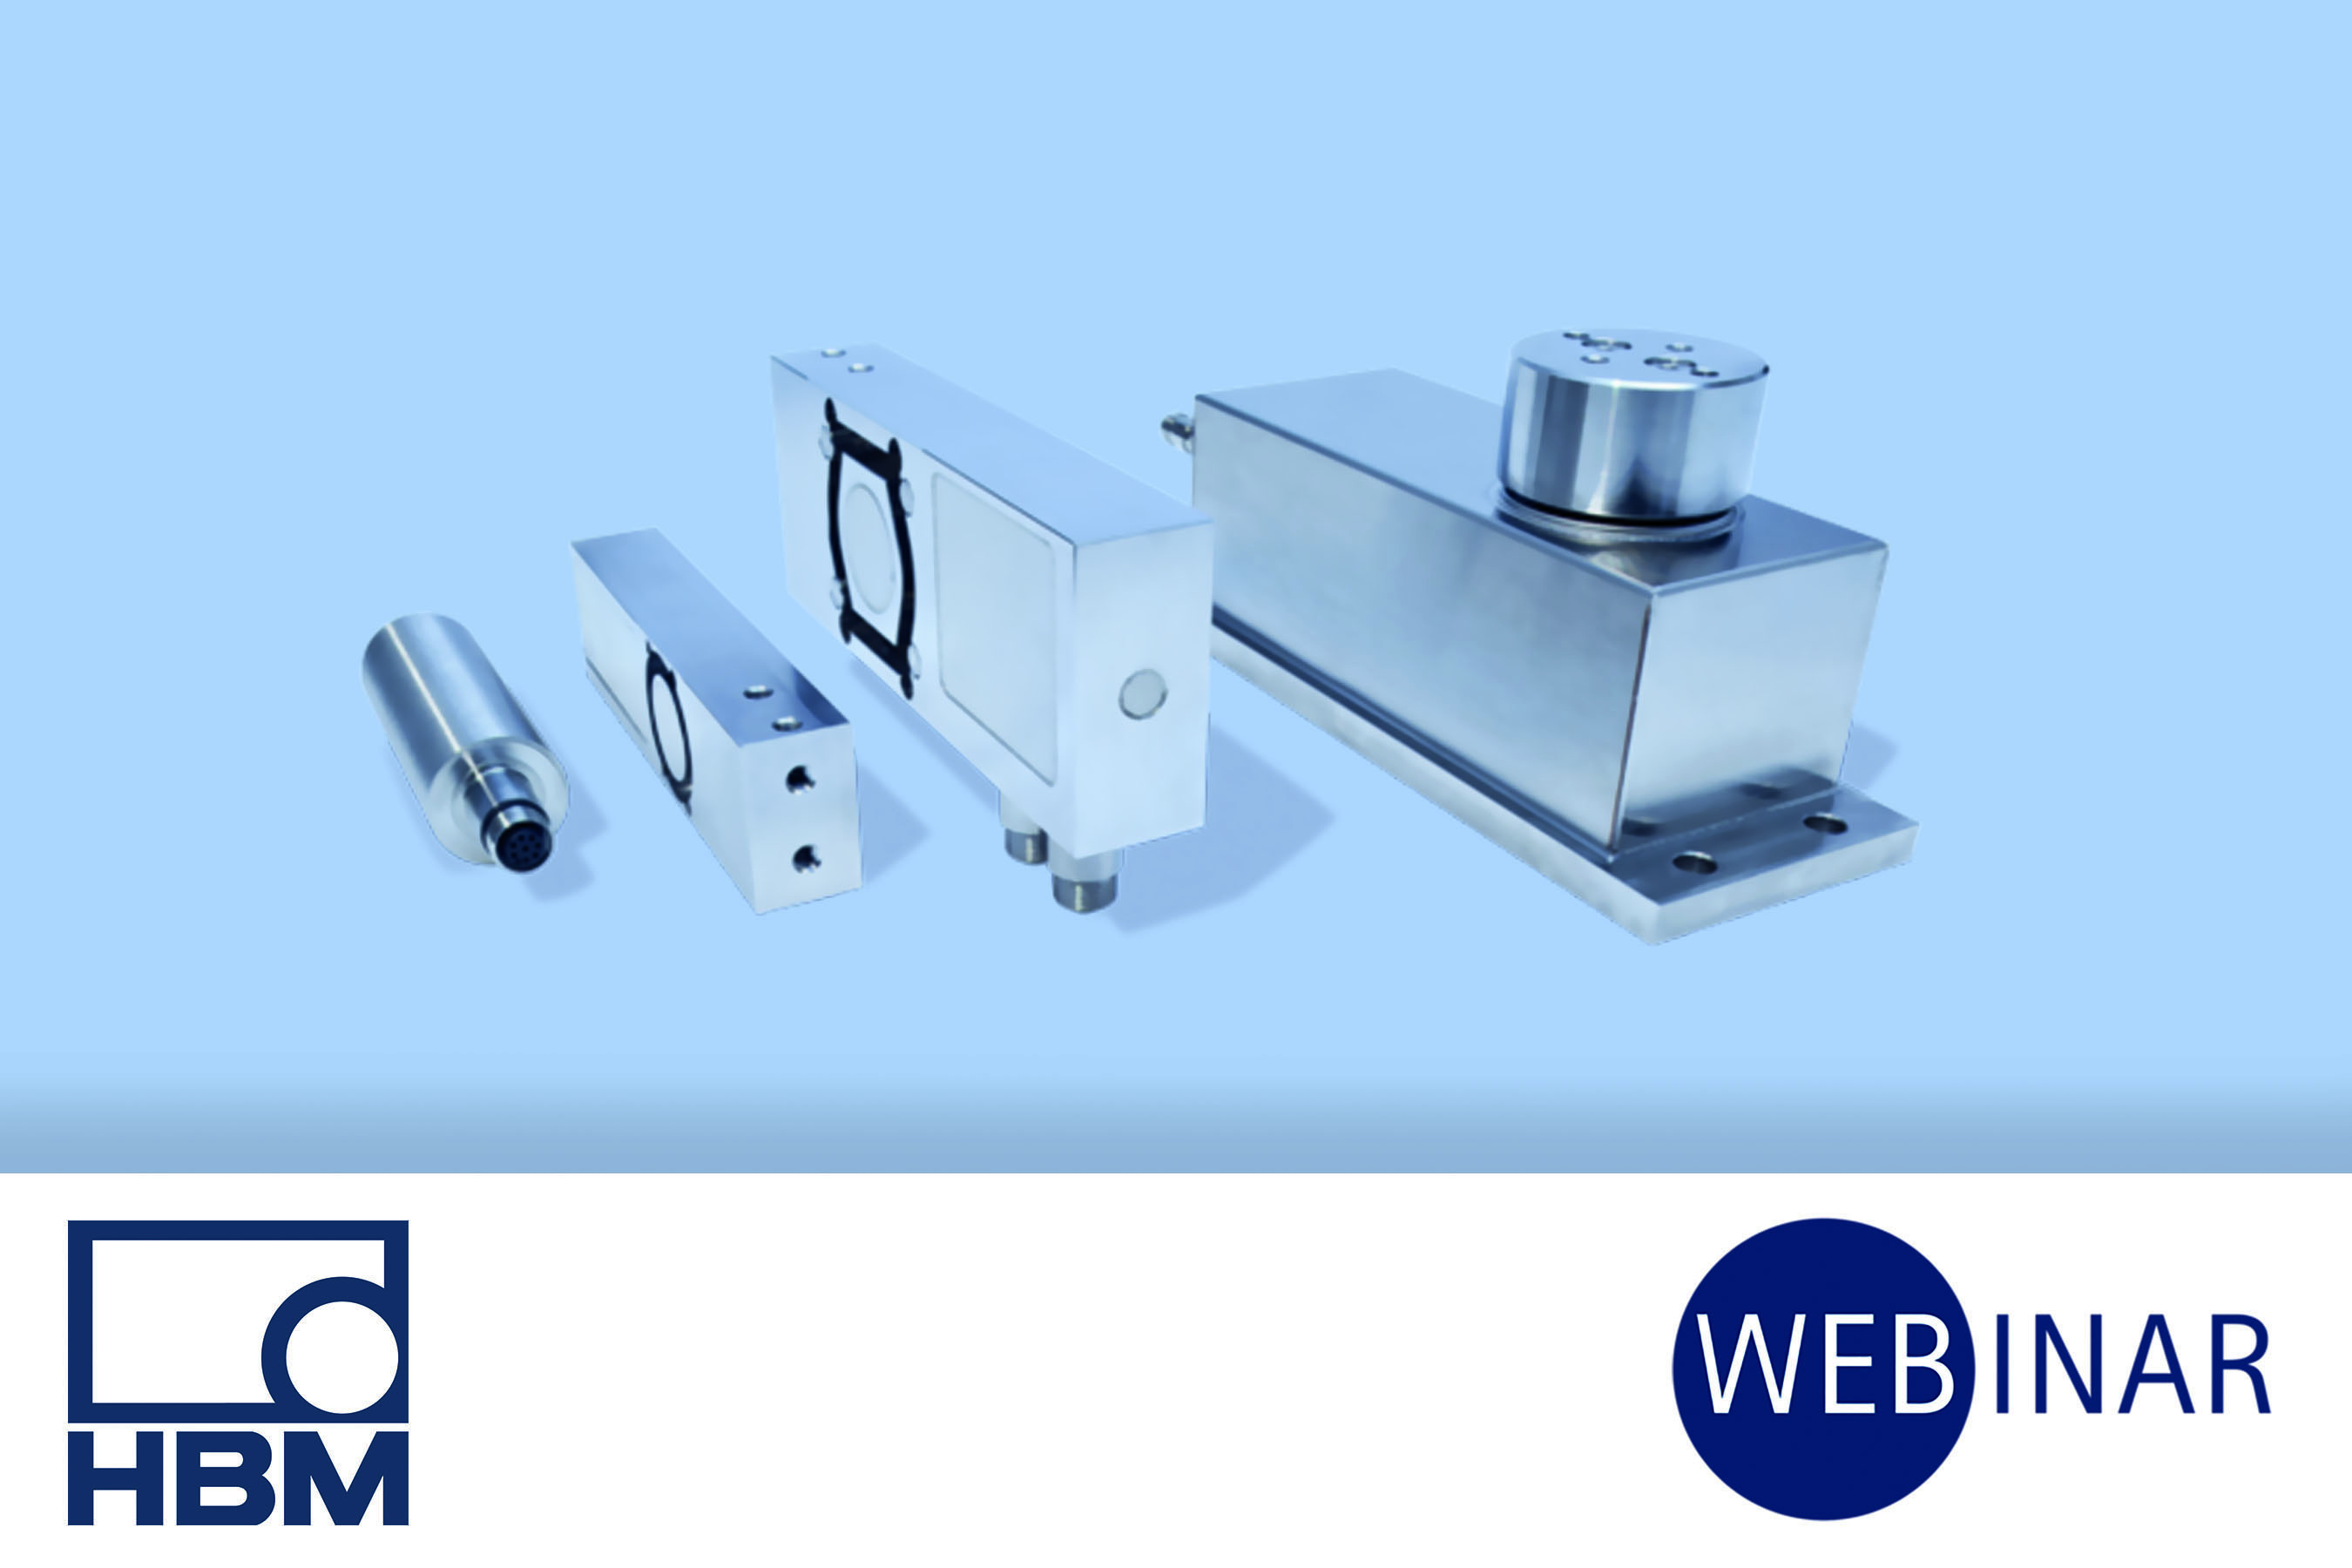 Webinar deals with filling dosing check-weighing and packaging technology